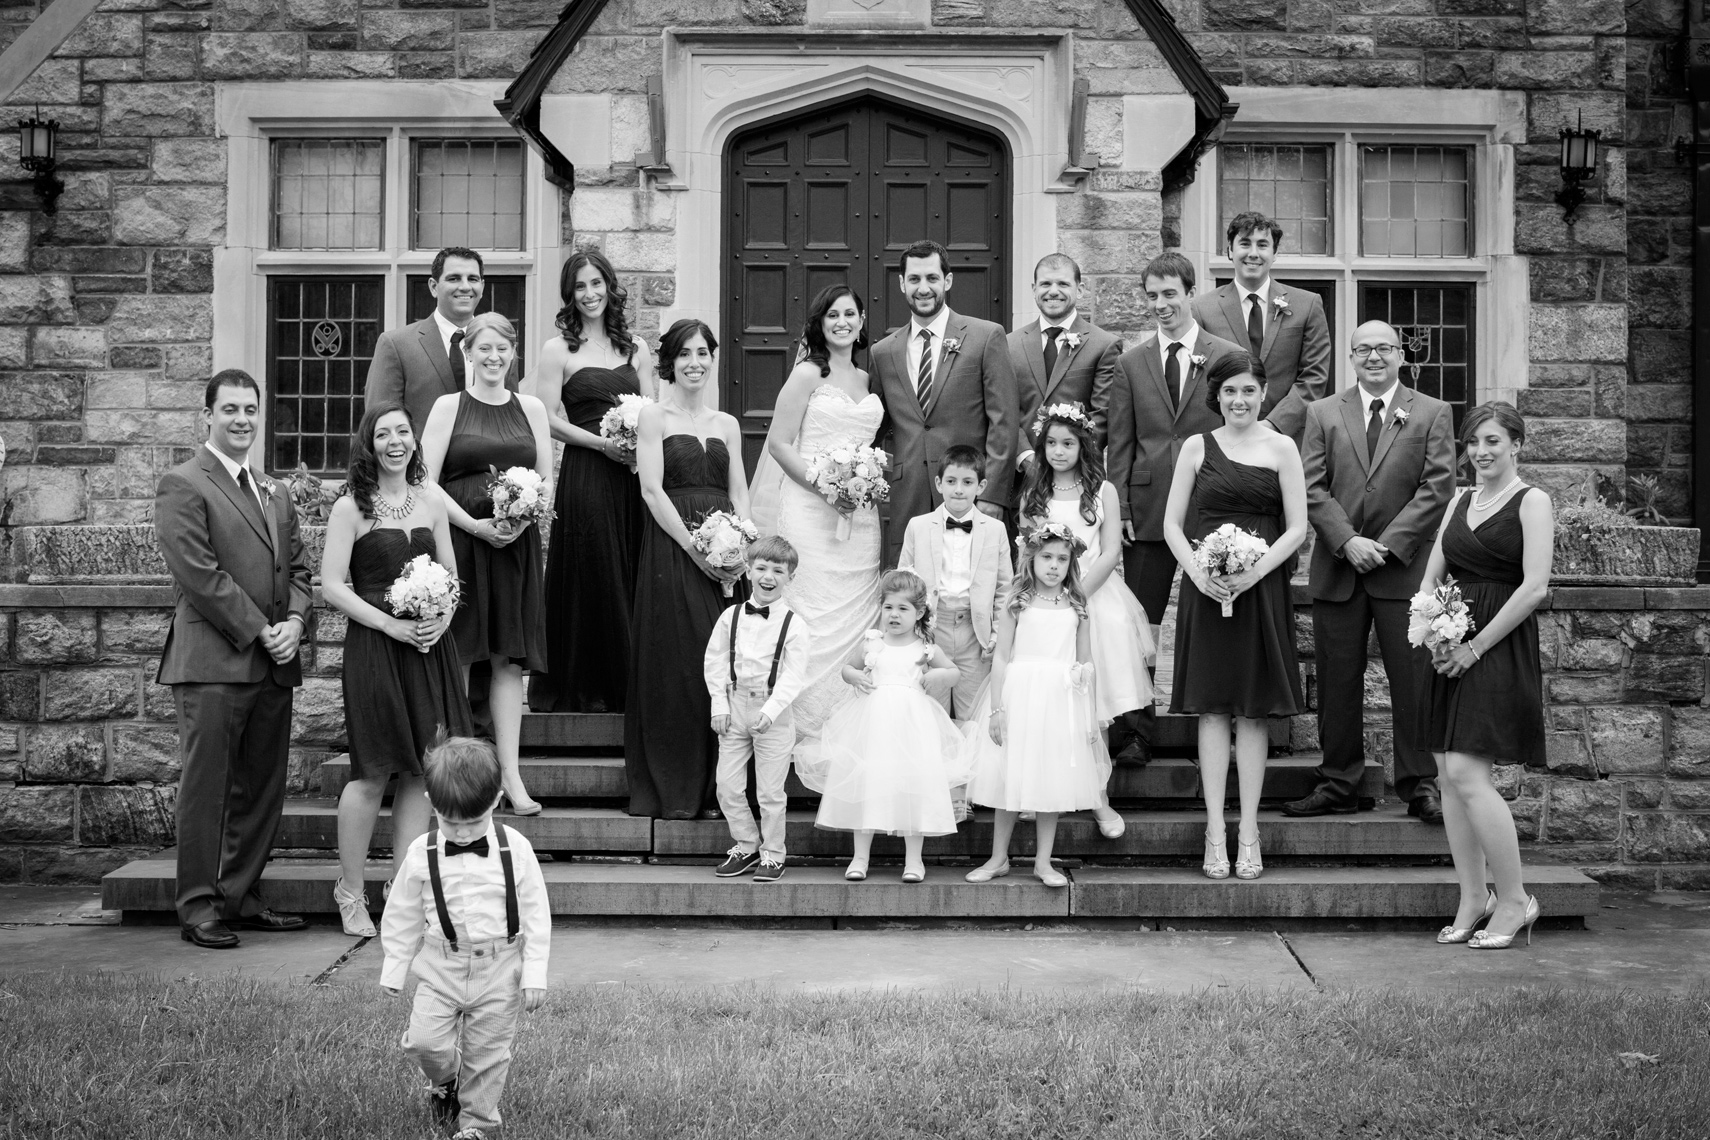 black and white wedding party photo little boy running out of frame